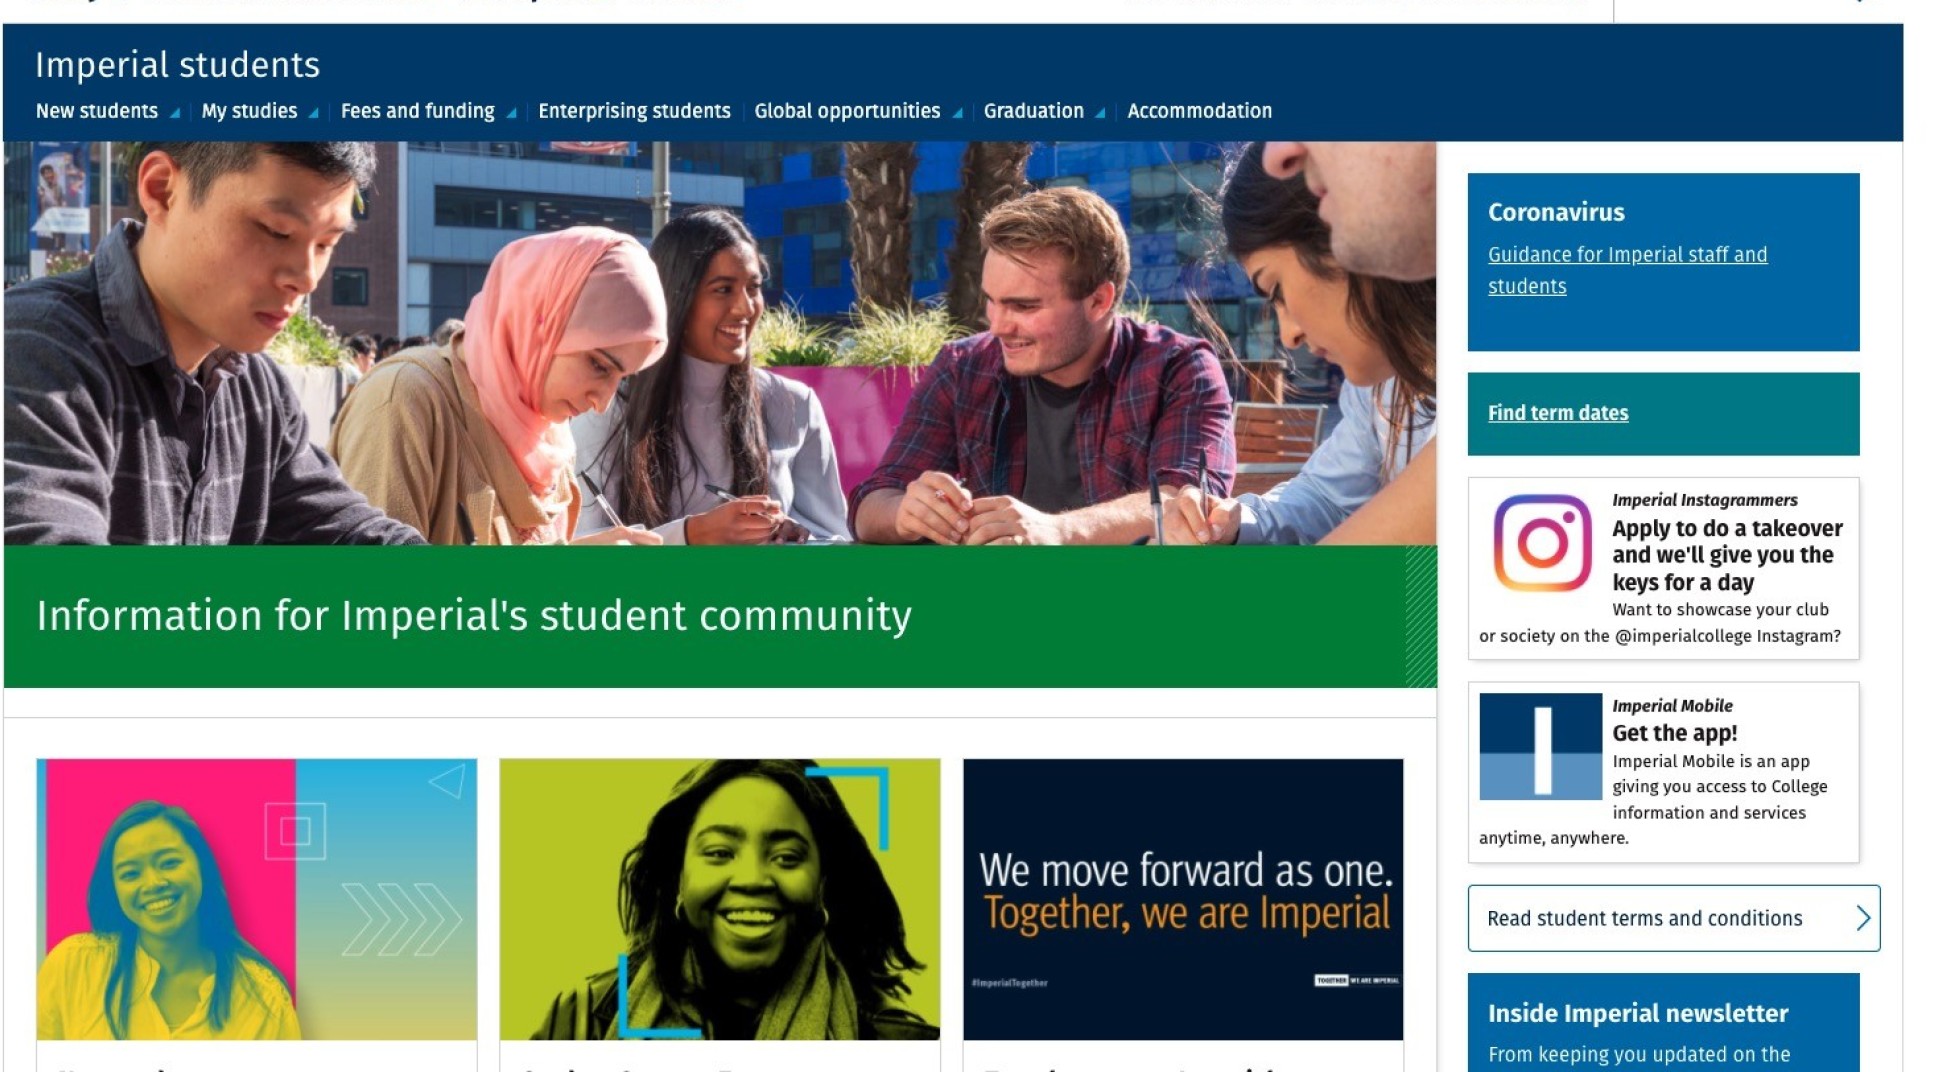 The Imperial students landing page which uses the landing page with sidebar layout